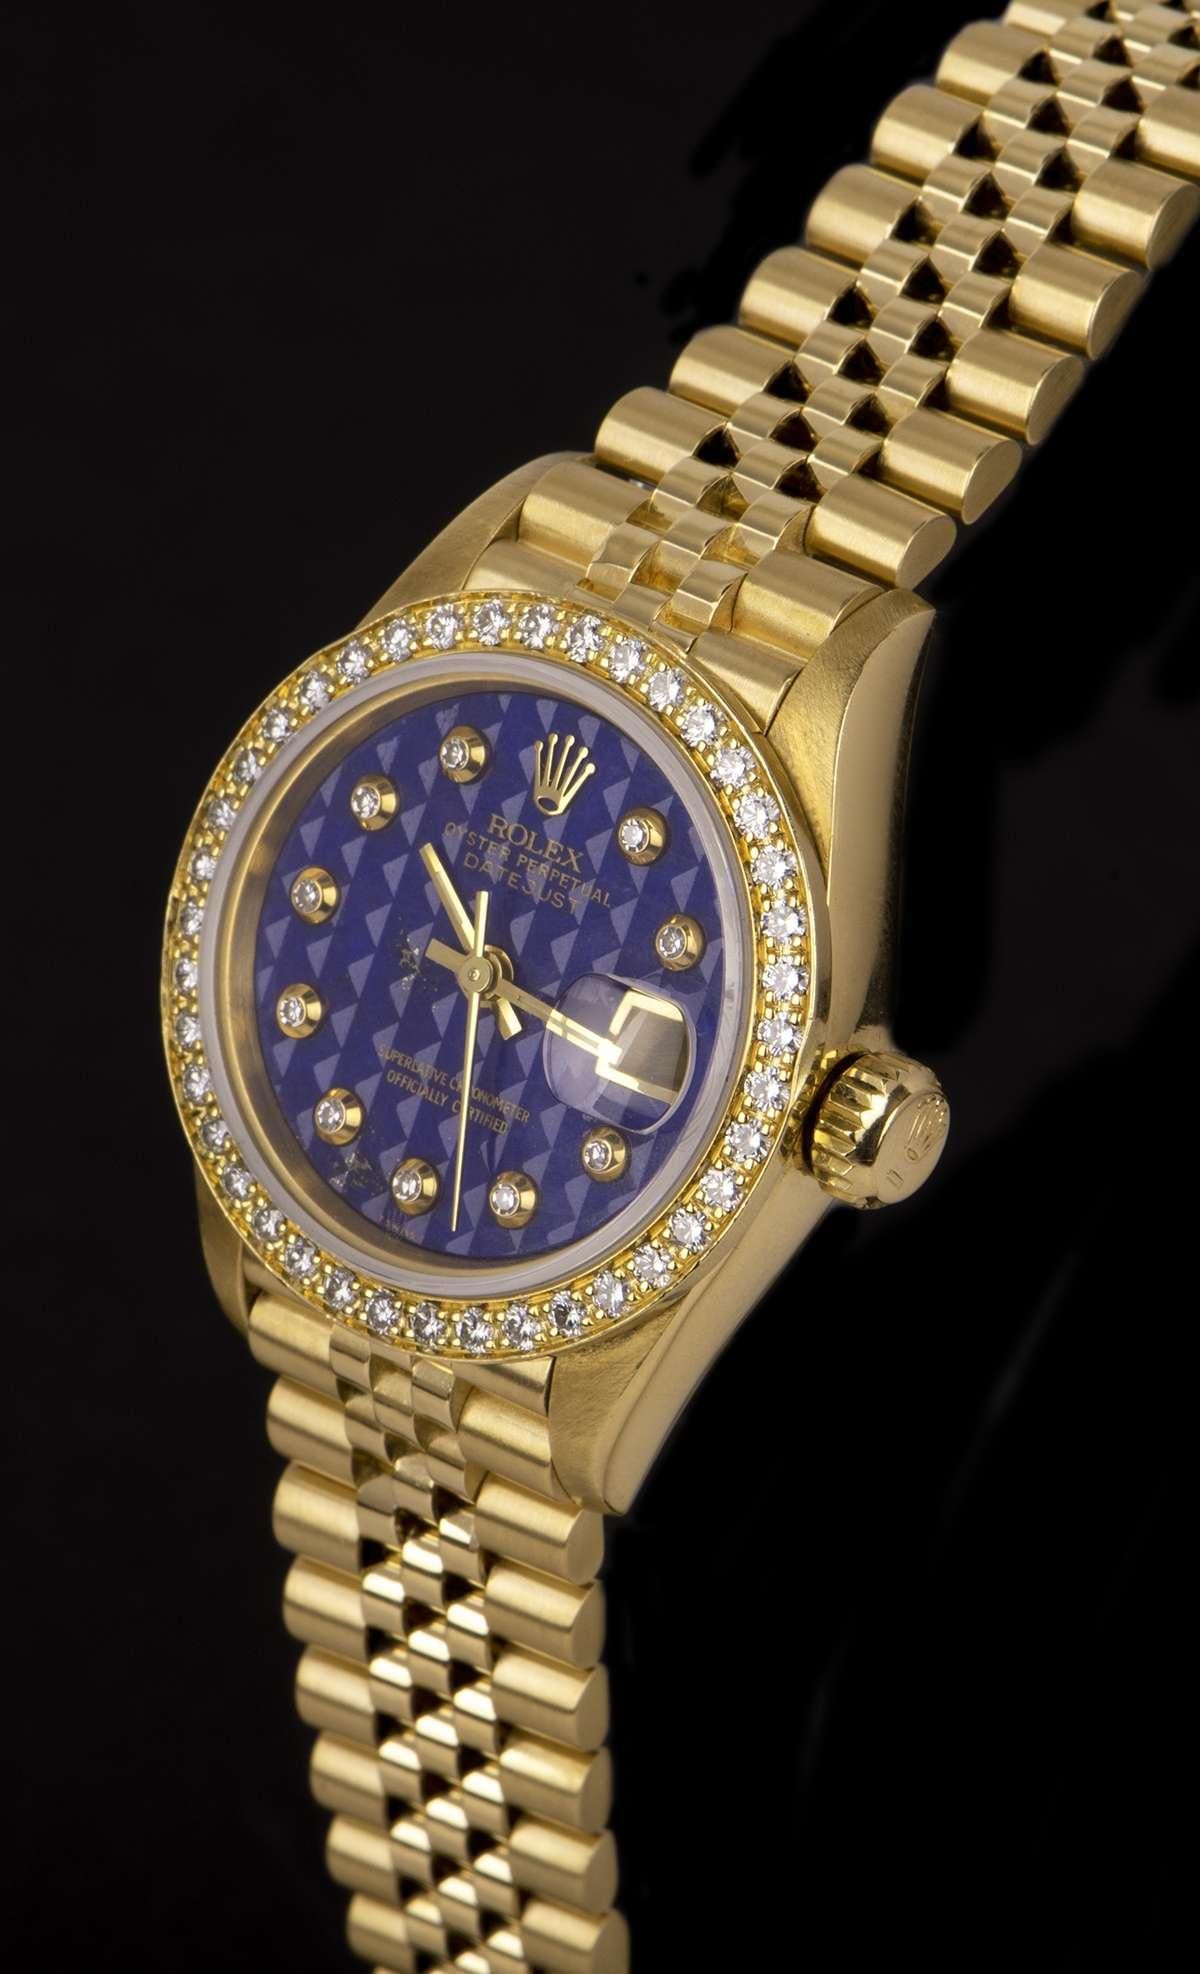 An 26mm 1990 18k Yellow Gold Oyster Perpetual Datejust Ladies Wristwatch, rare lapis lazuli pyramid dial with 10 applied rubover set diamonds, date at 3 0'clock, a fixed 18k yellow gold bezel set with approximately 40 round brilliant cut diamonds